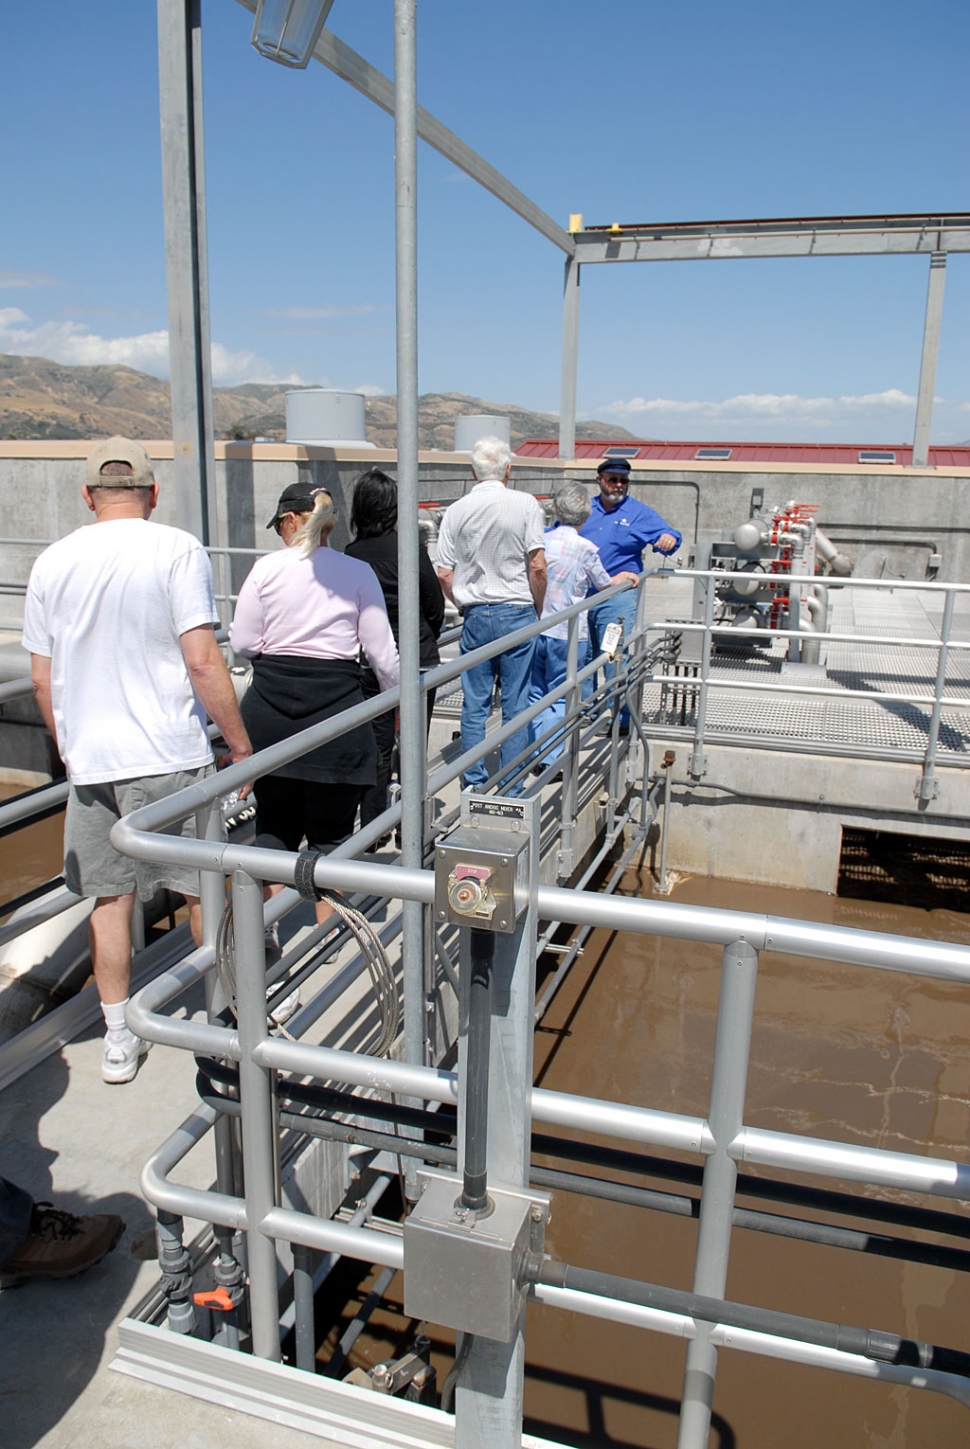 Tom Peterson, Plant Manager for our new water treatment plant, gave visitors a thorough tour of the facility during Saturday’s grand opening.